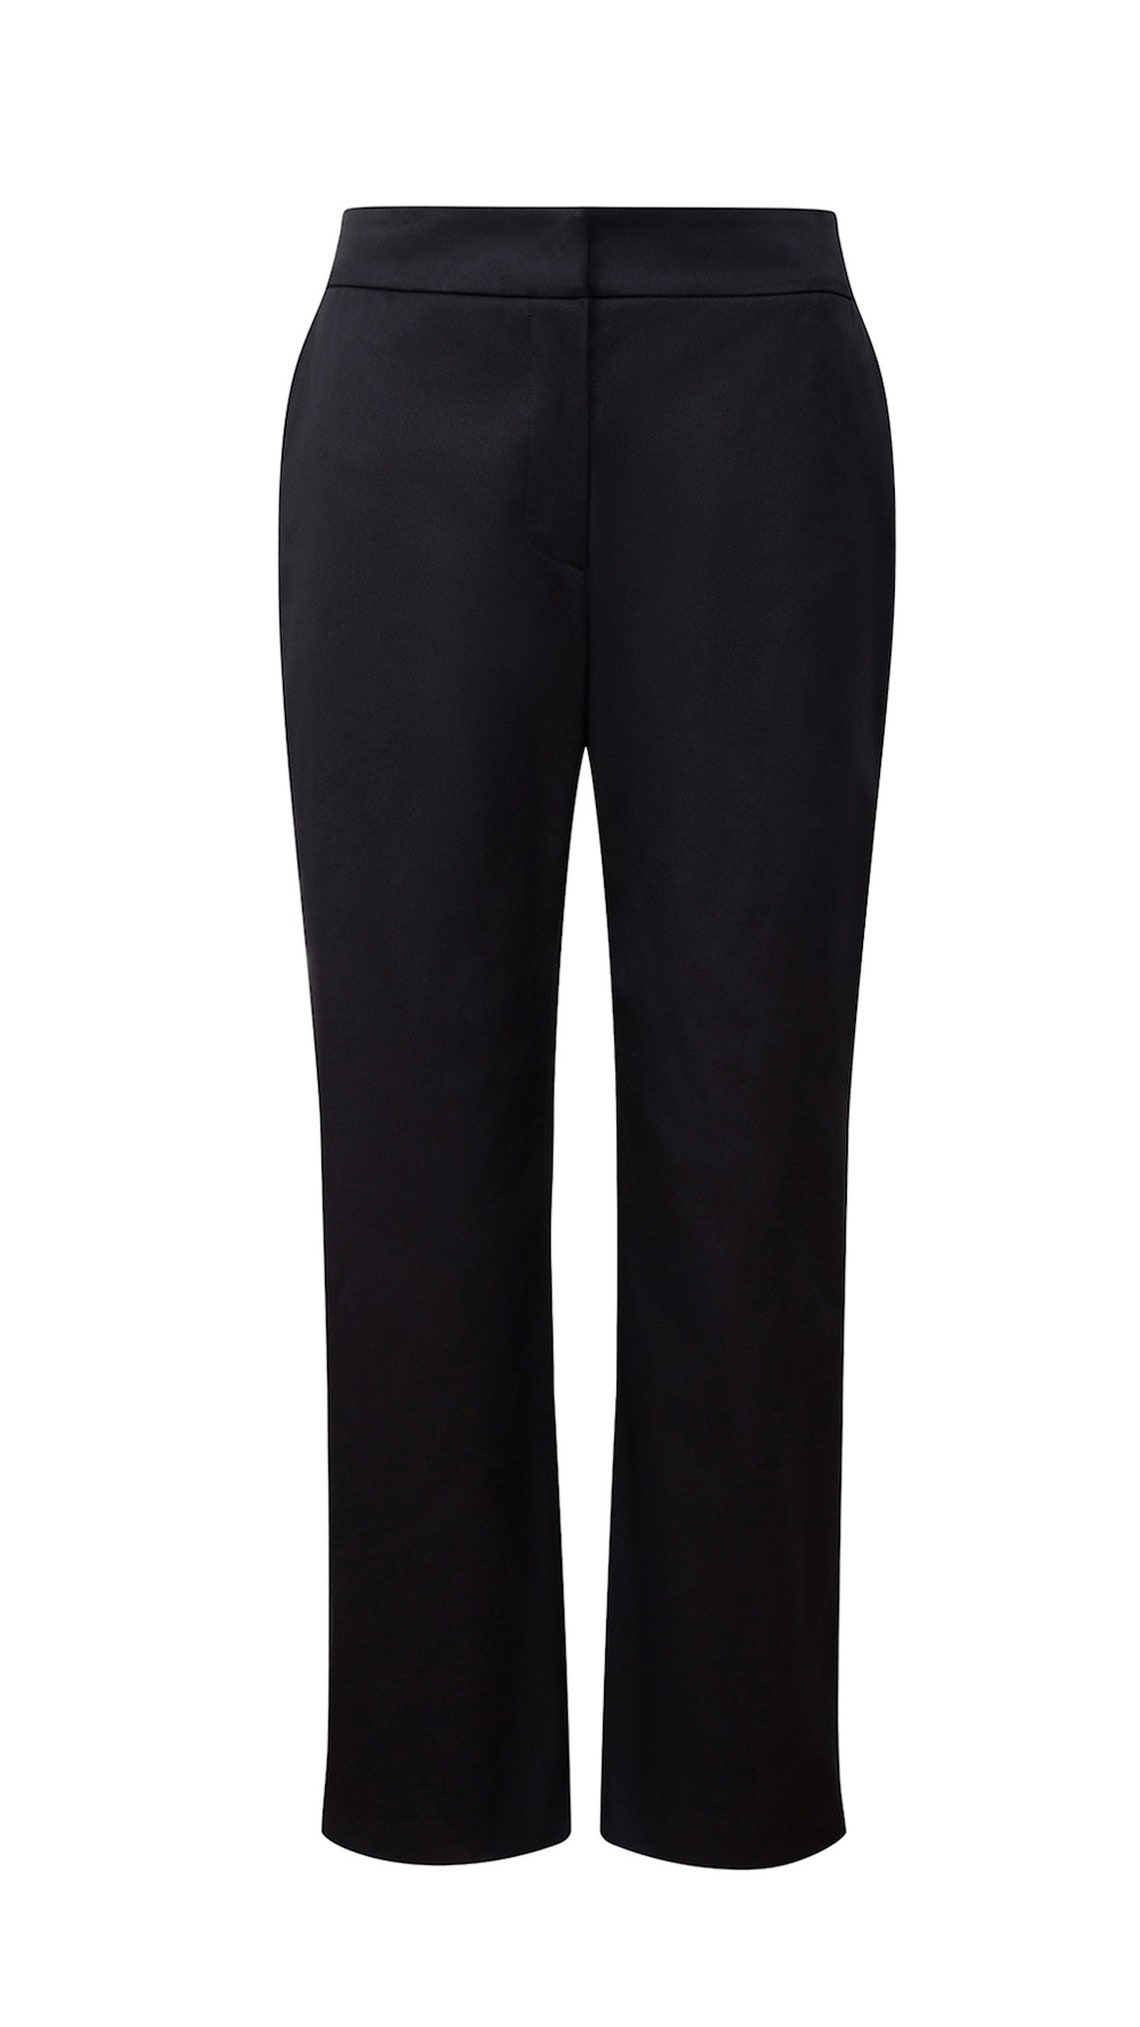 Cotton Stretch Ankle Grazer Trouser Pant in Black Made in - Etsy